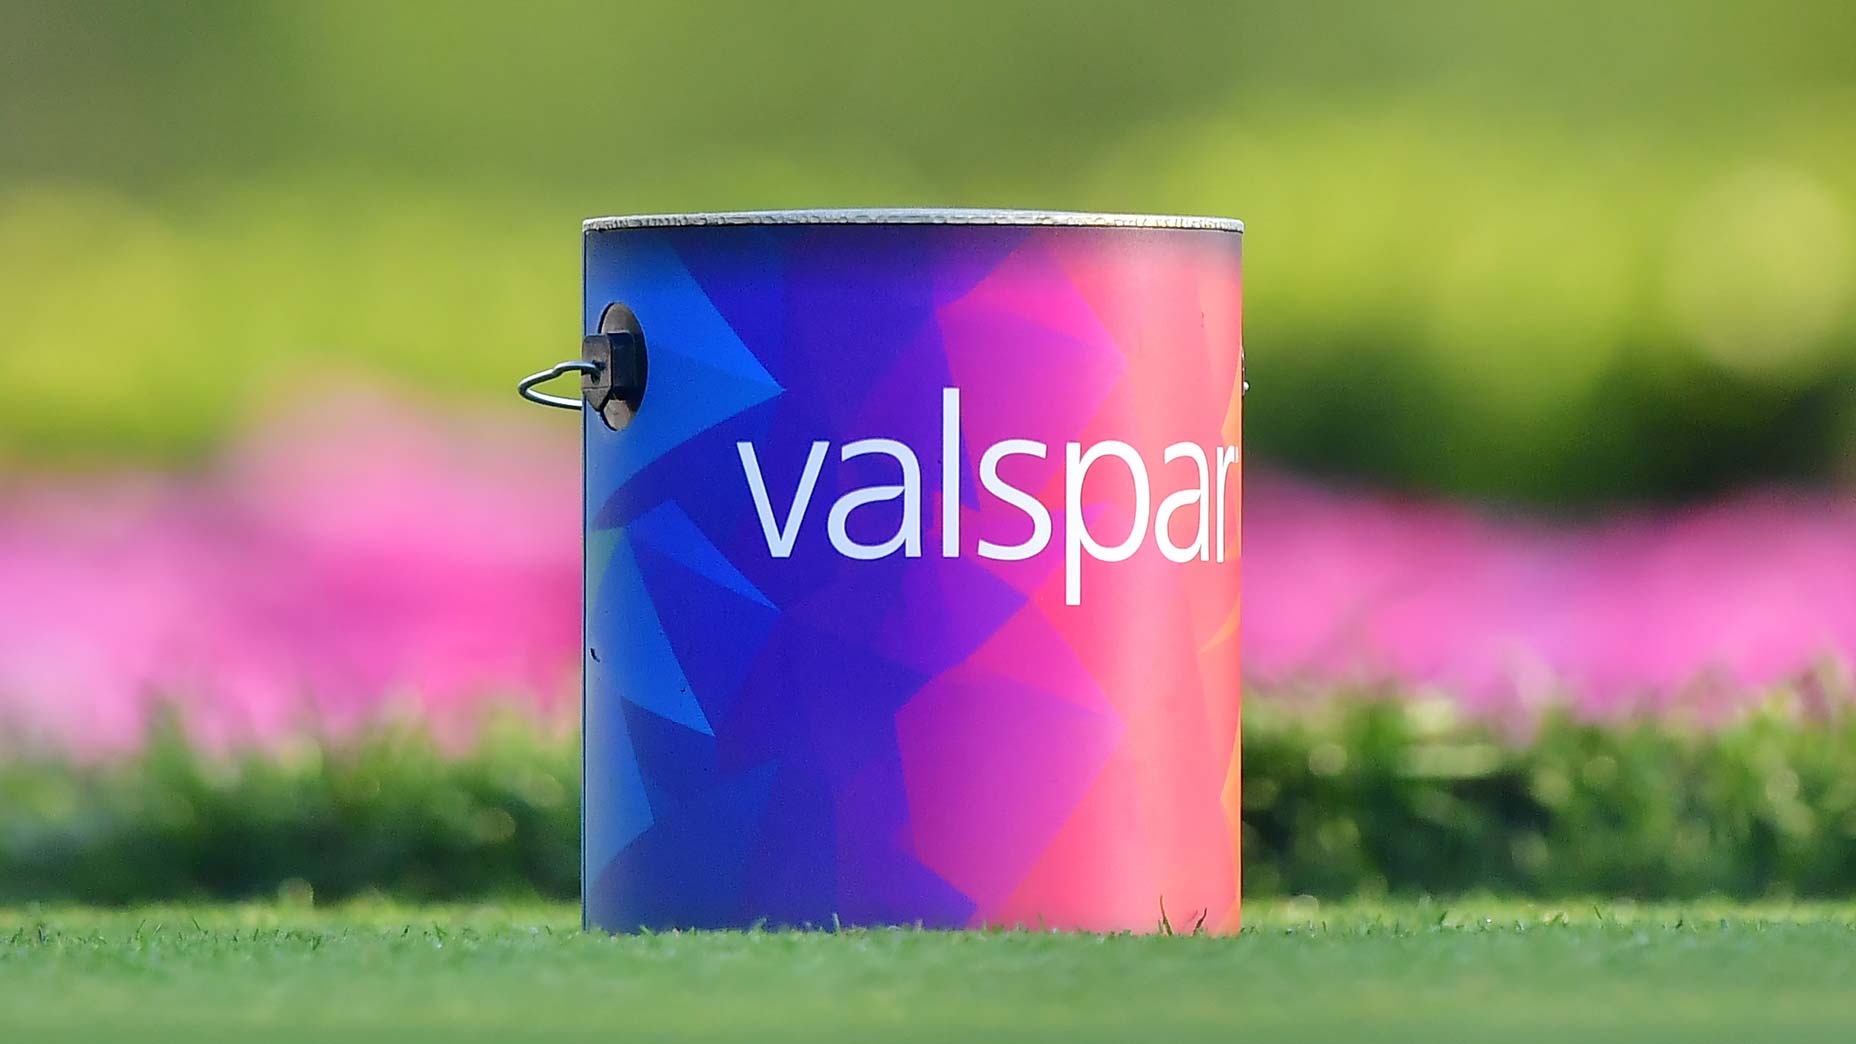 A paint bucket serving as a Valspar Championship tee marker at the PGA Tuur event